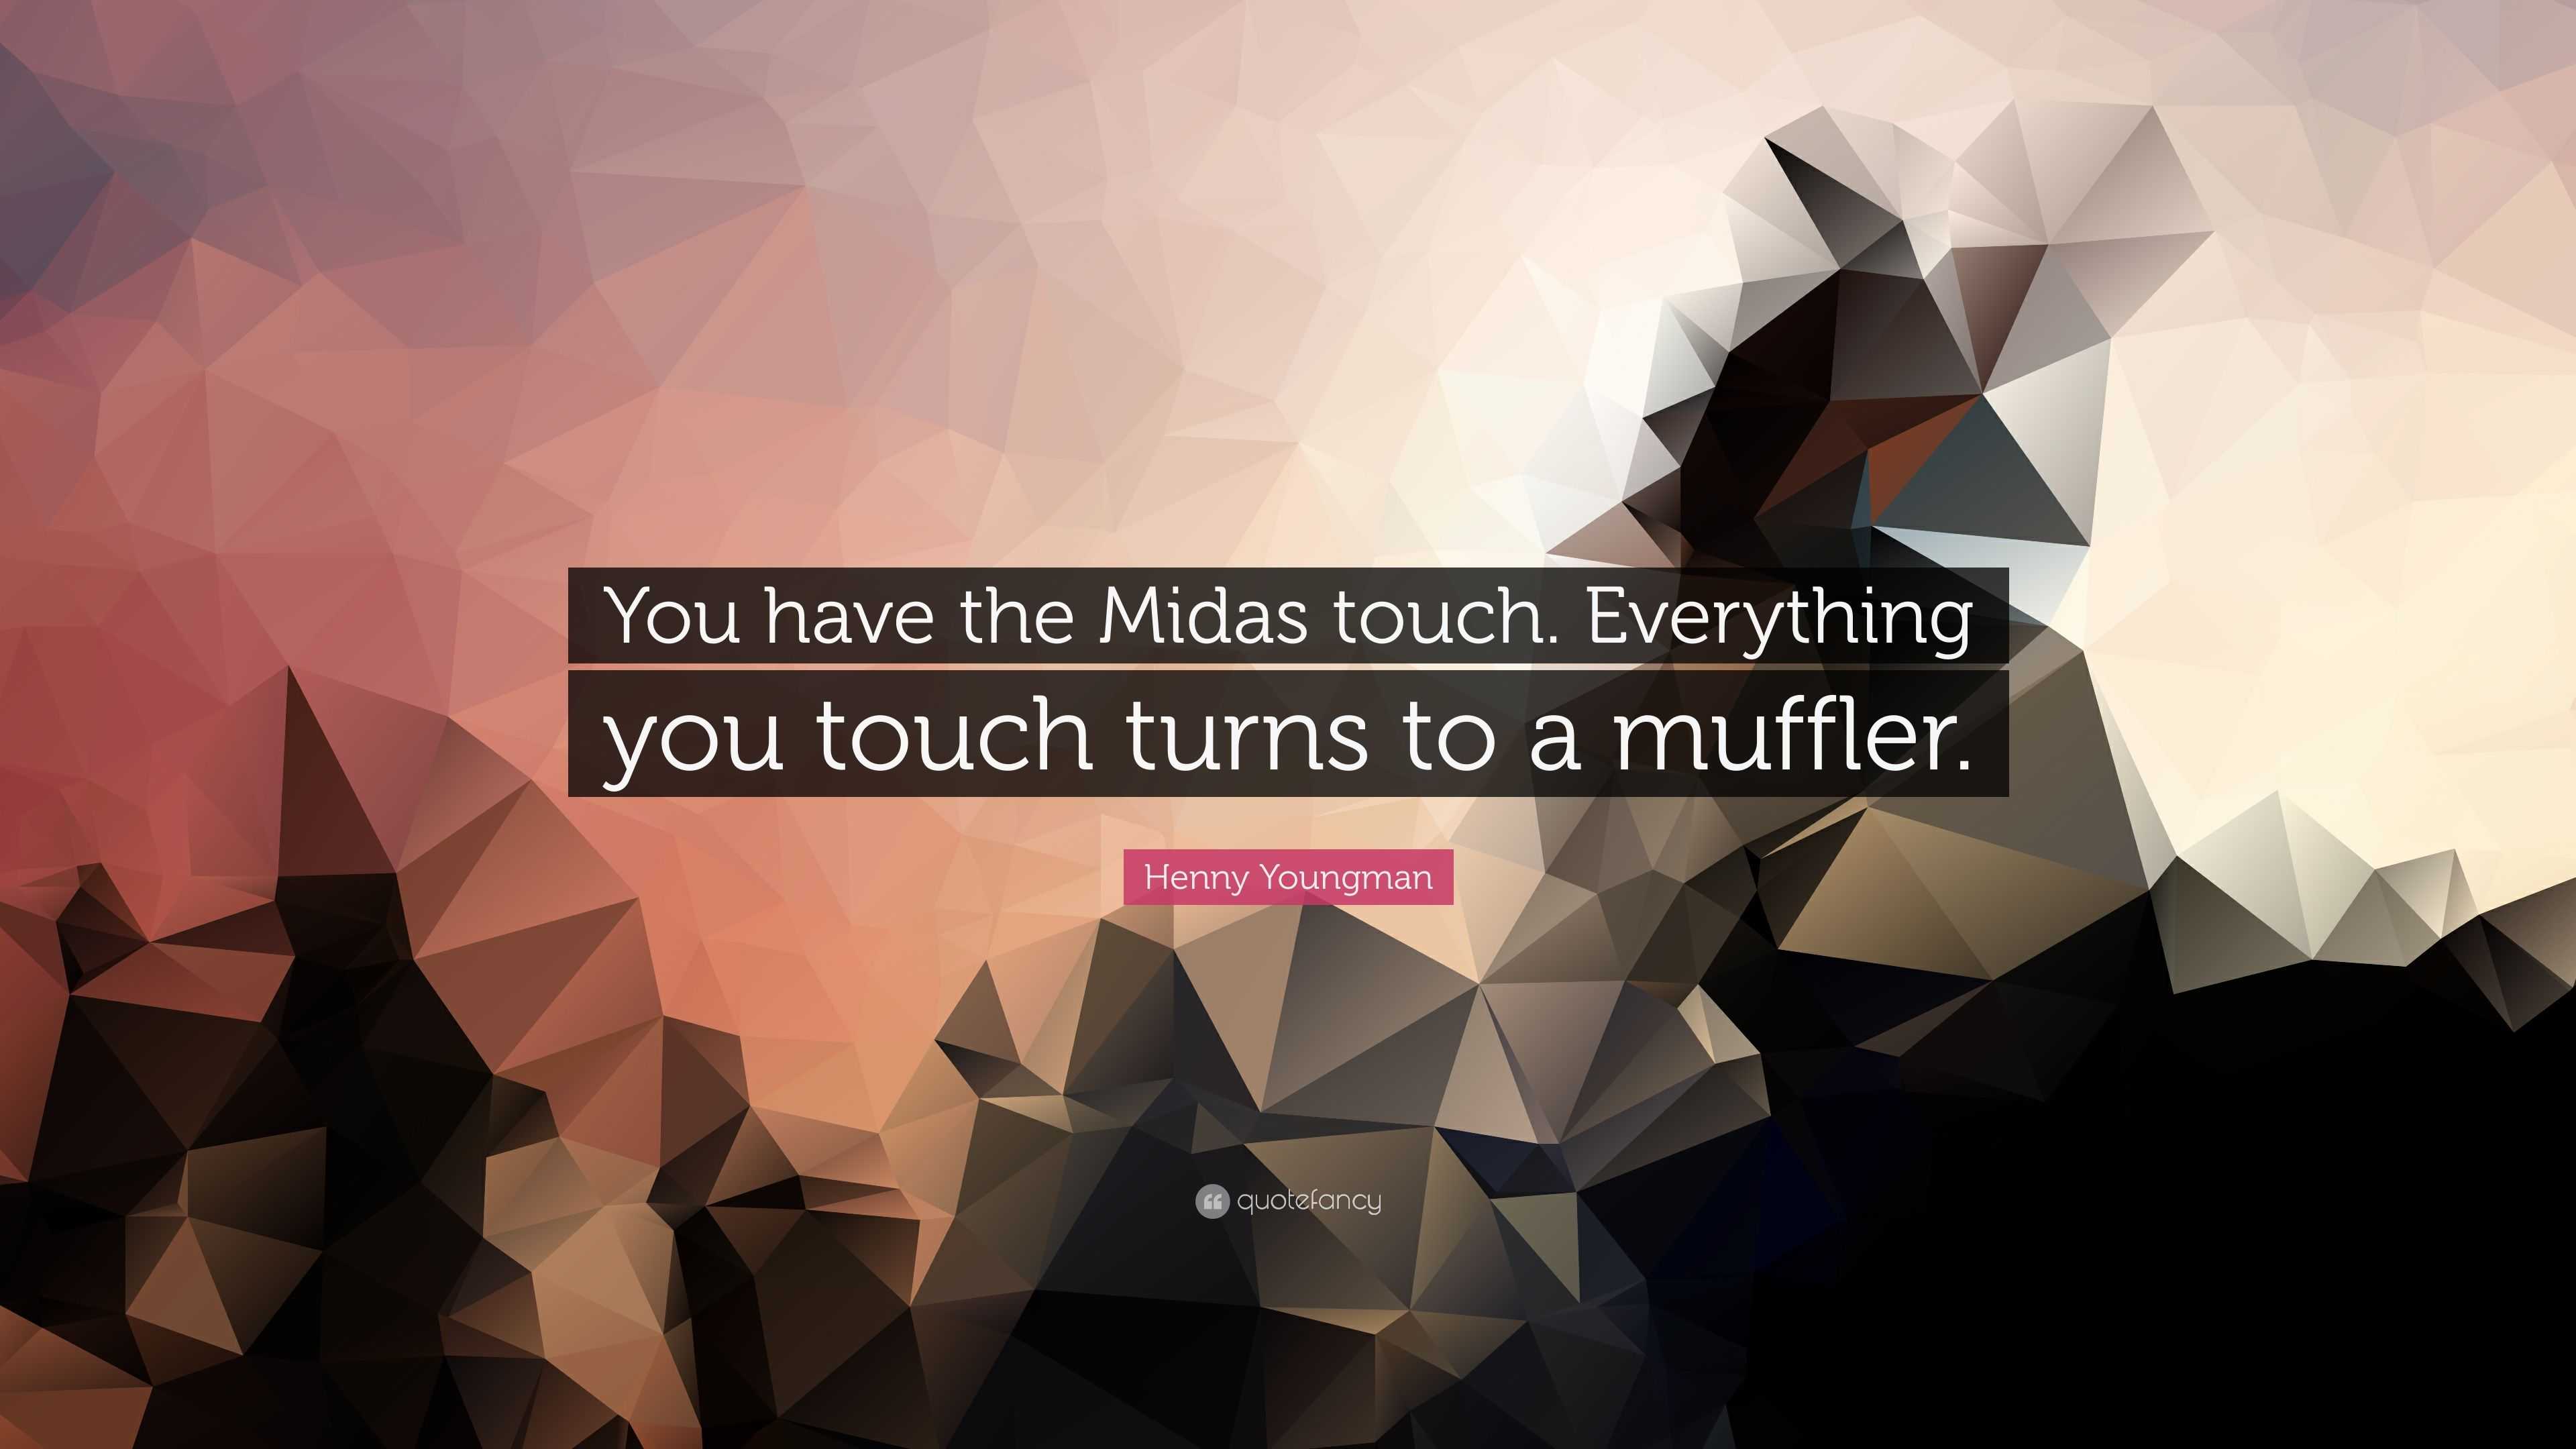 https://quotefancy.com/media/wallpaper/3840x2160/3864367-Henny-Youngman-Quote-You-have-the-Midas-touch-Everything-you-touch.jpg